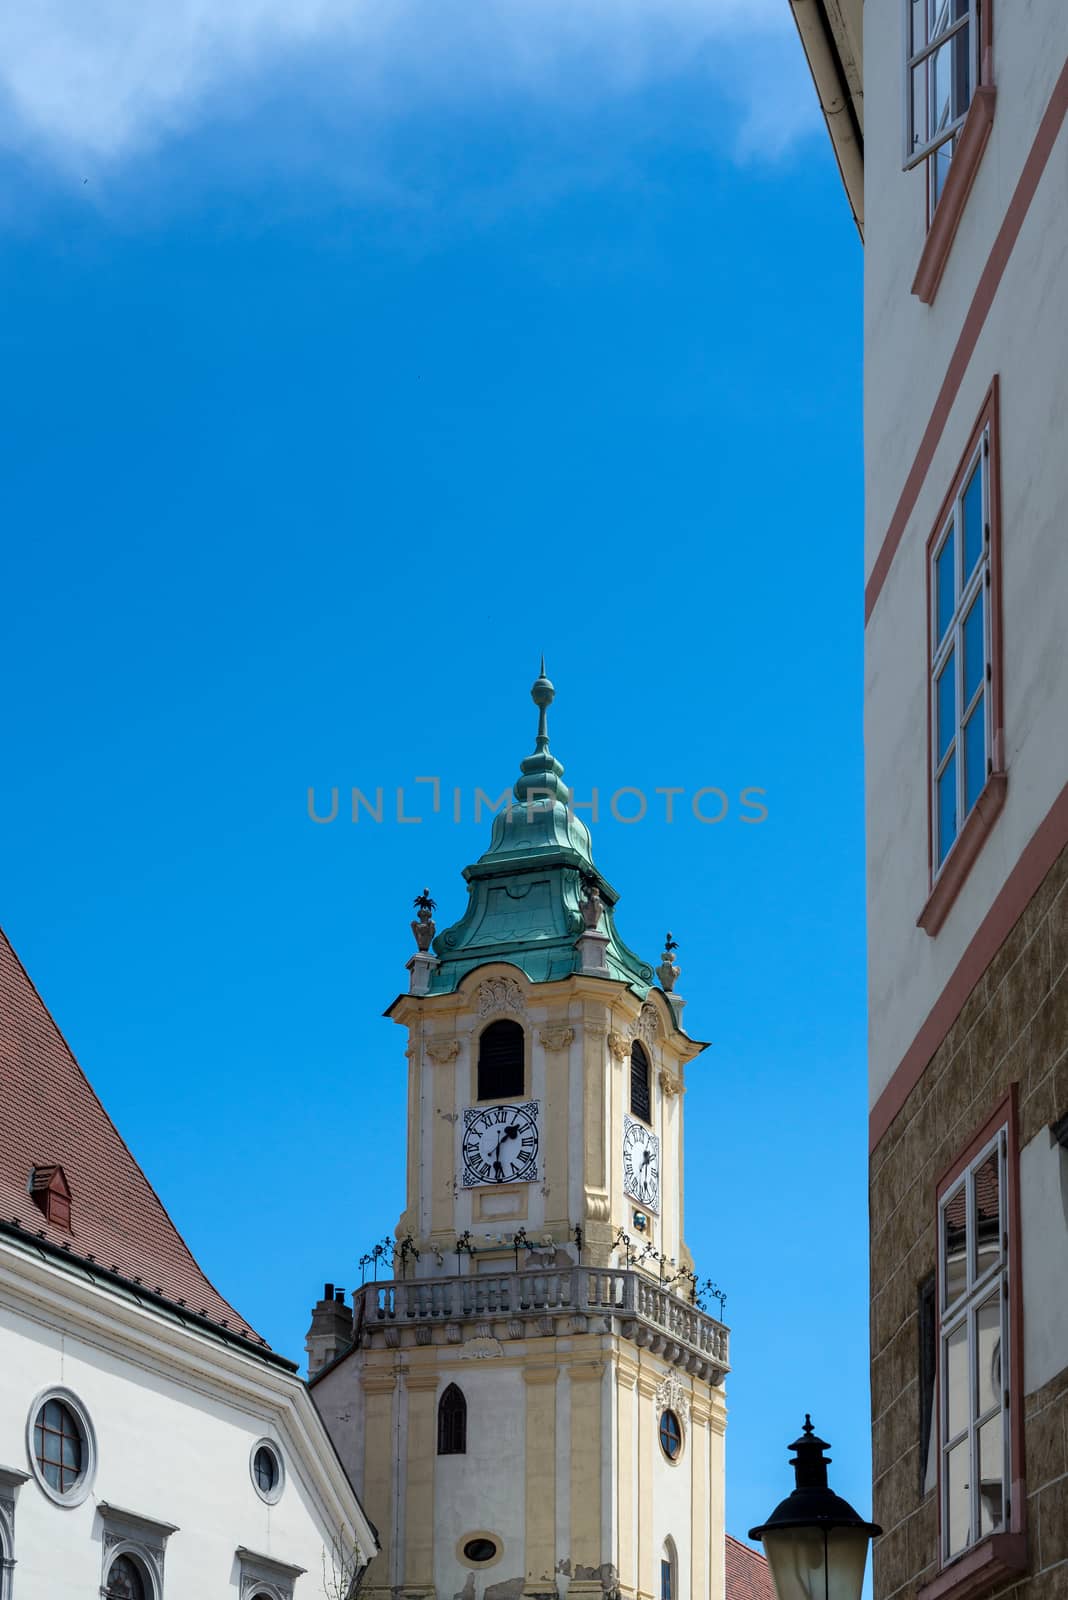 Bratislava city - view of Old Town Hall from Main Square in Bratislava